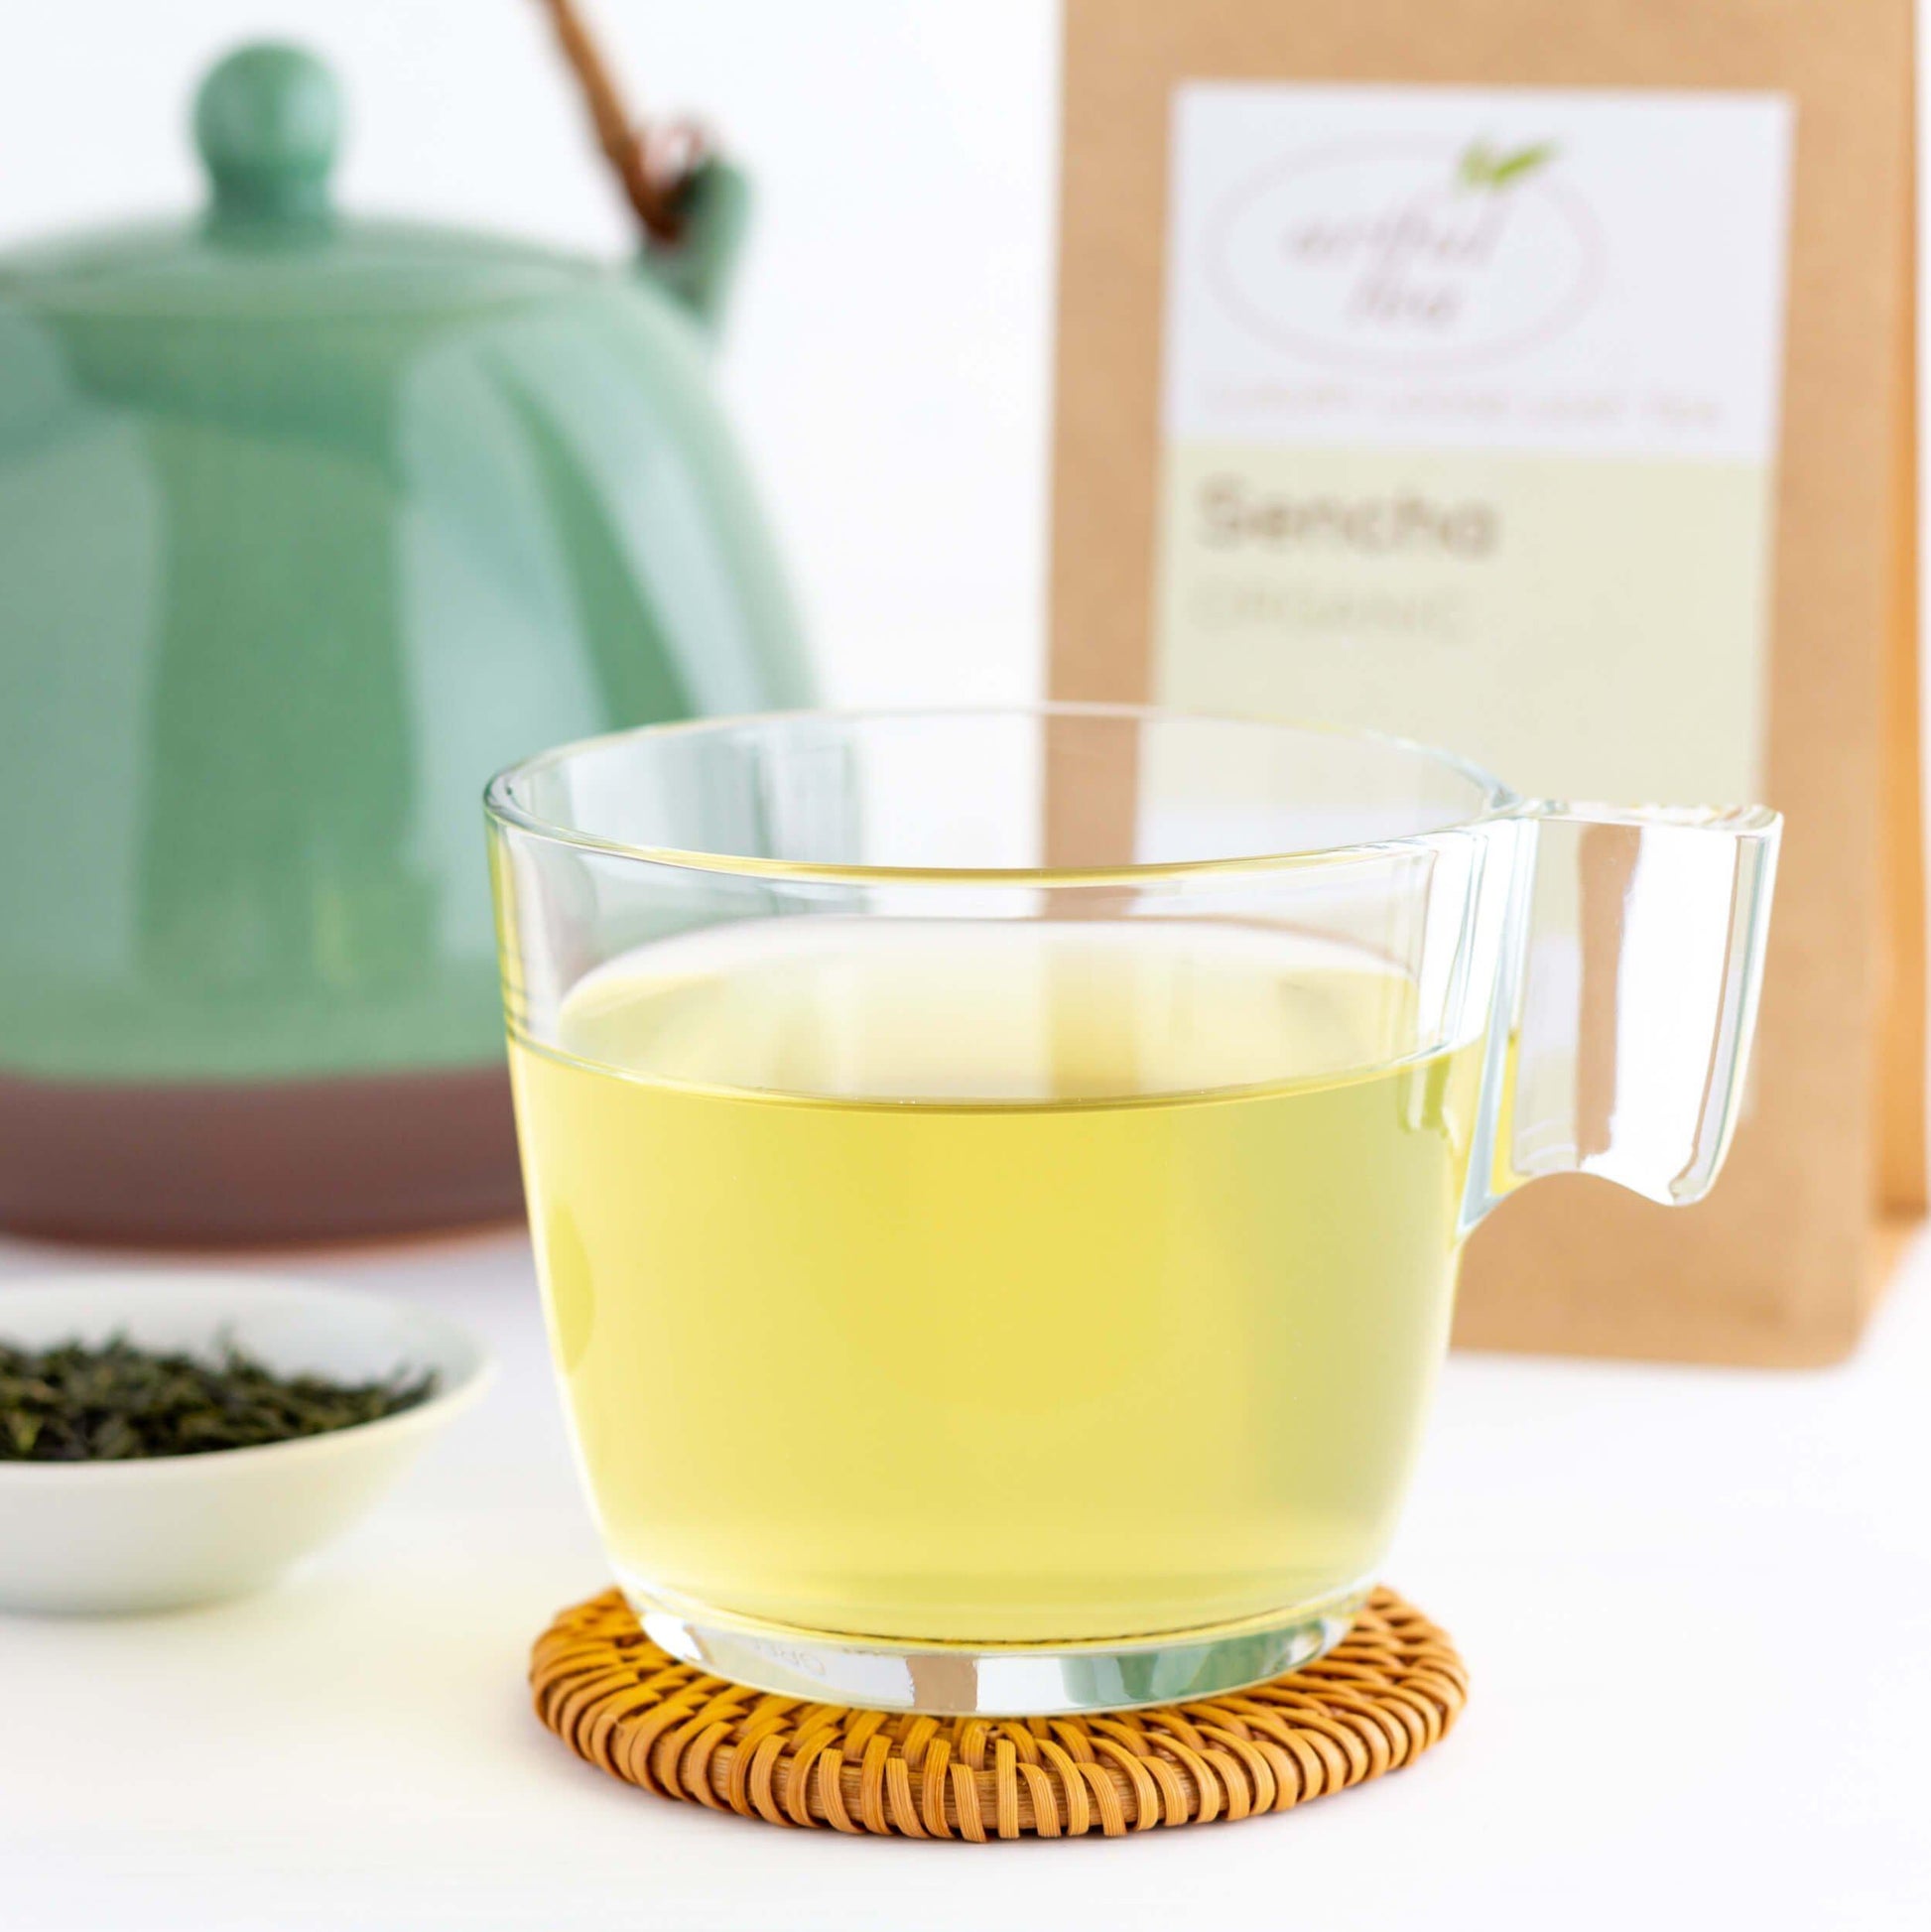 Sencha Organic Green Tea shown as brewed tea in a glass mug with teal green teapot and kraft bag of packaged tea in the background